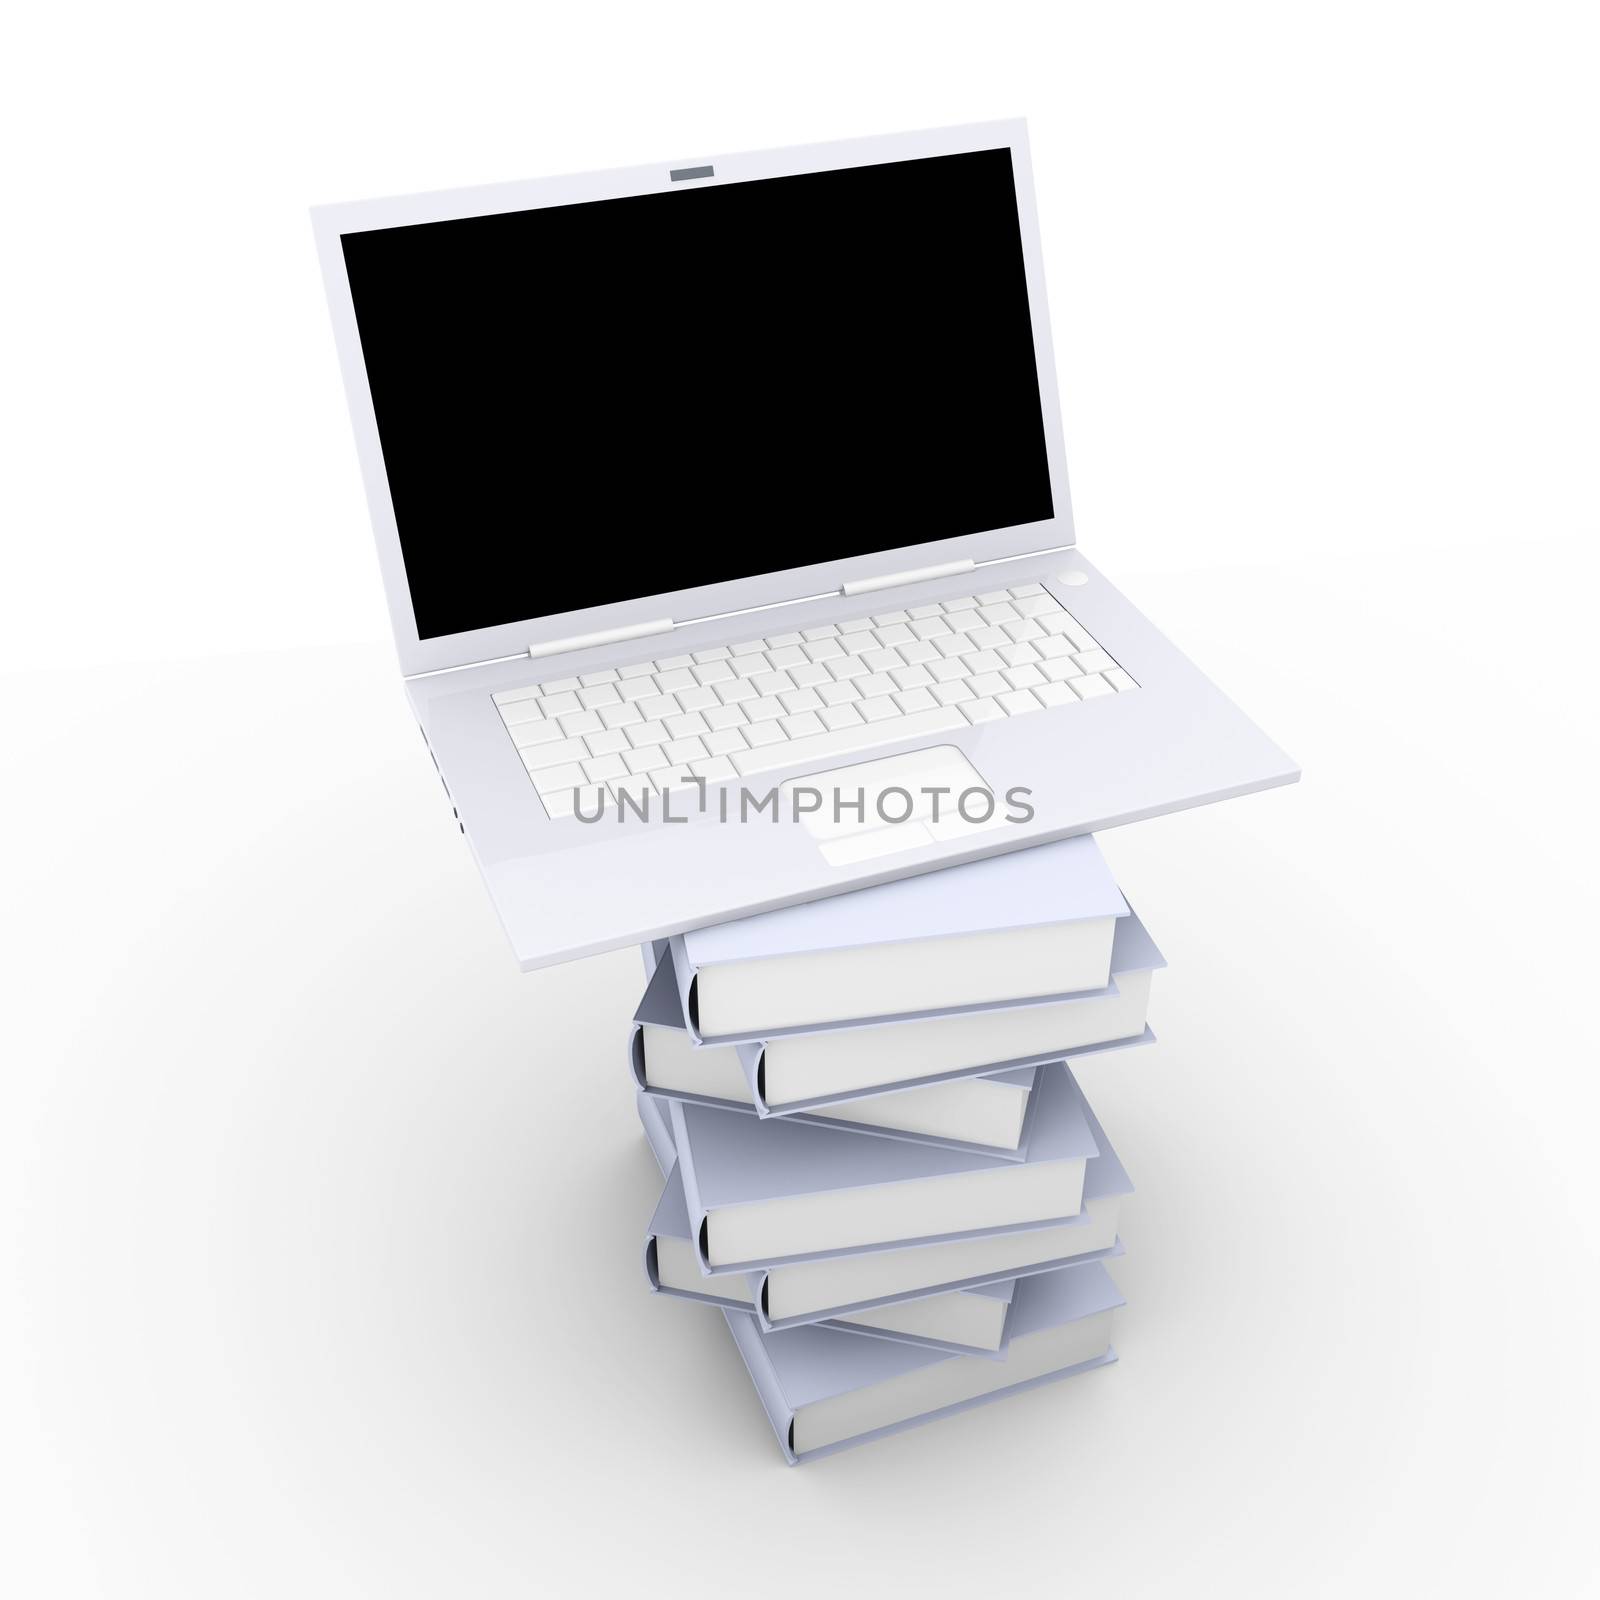 A Laptop with books. 3D rendered illustration. Isolated on white.